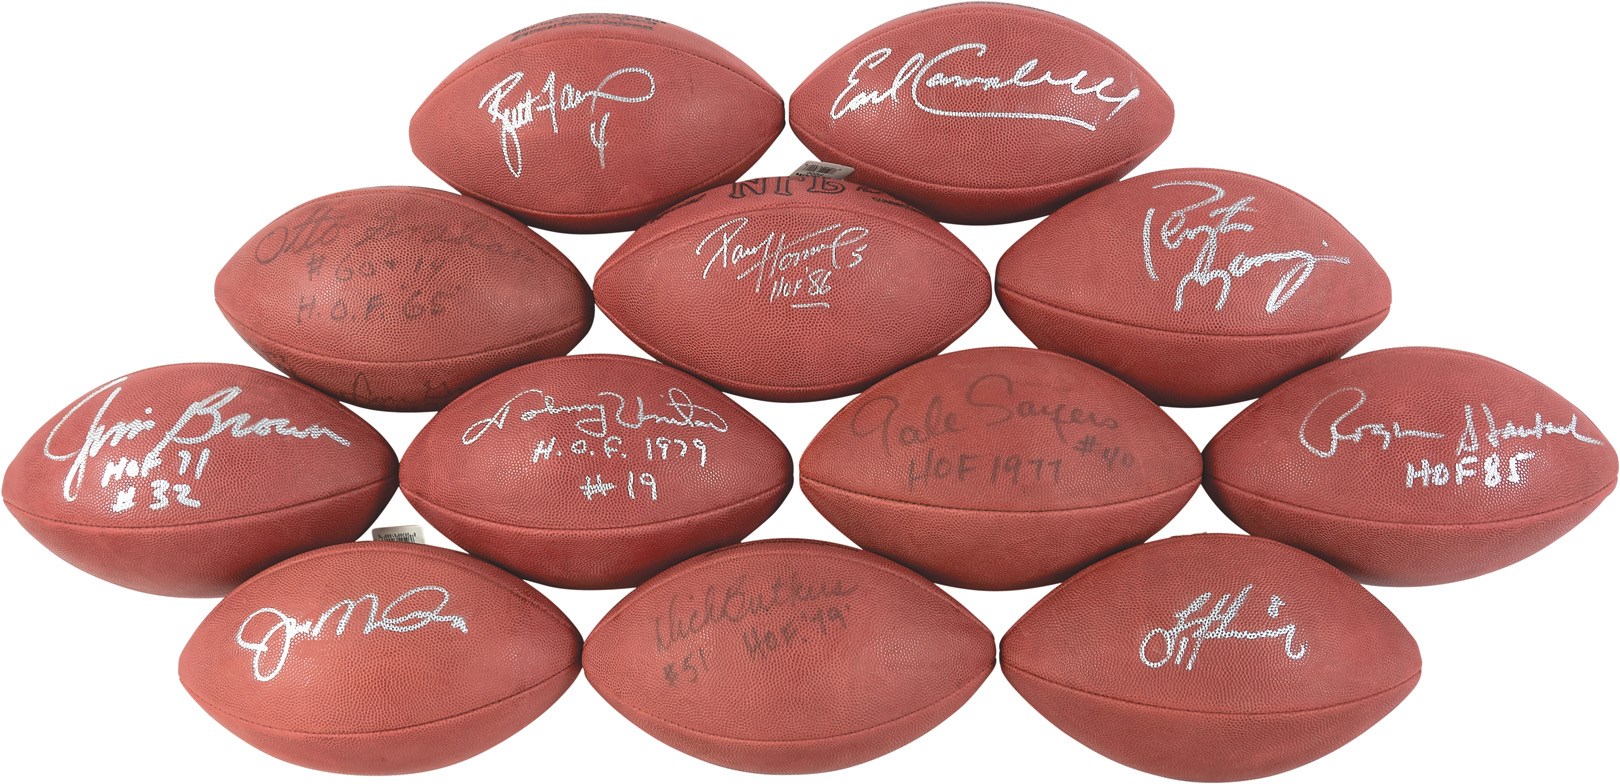 Football - Hall of Famers & Legends Signed Football Collection w/Unitas, Brown, Manning (24)